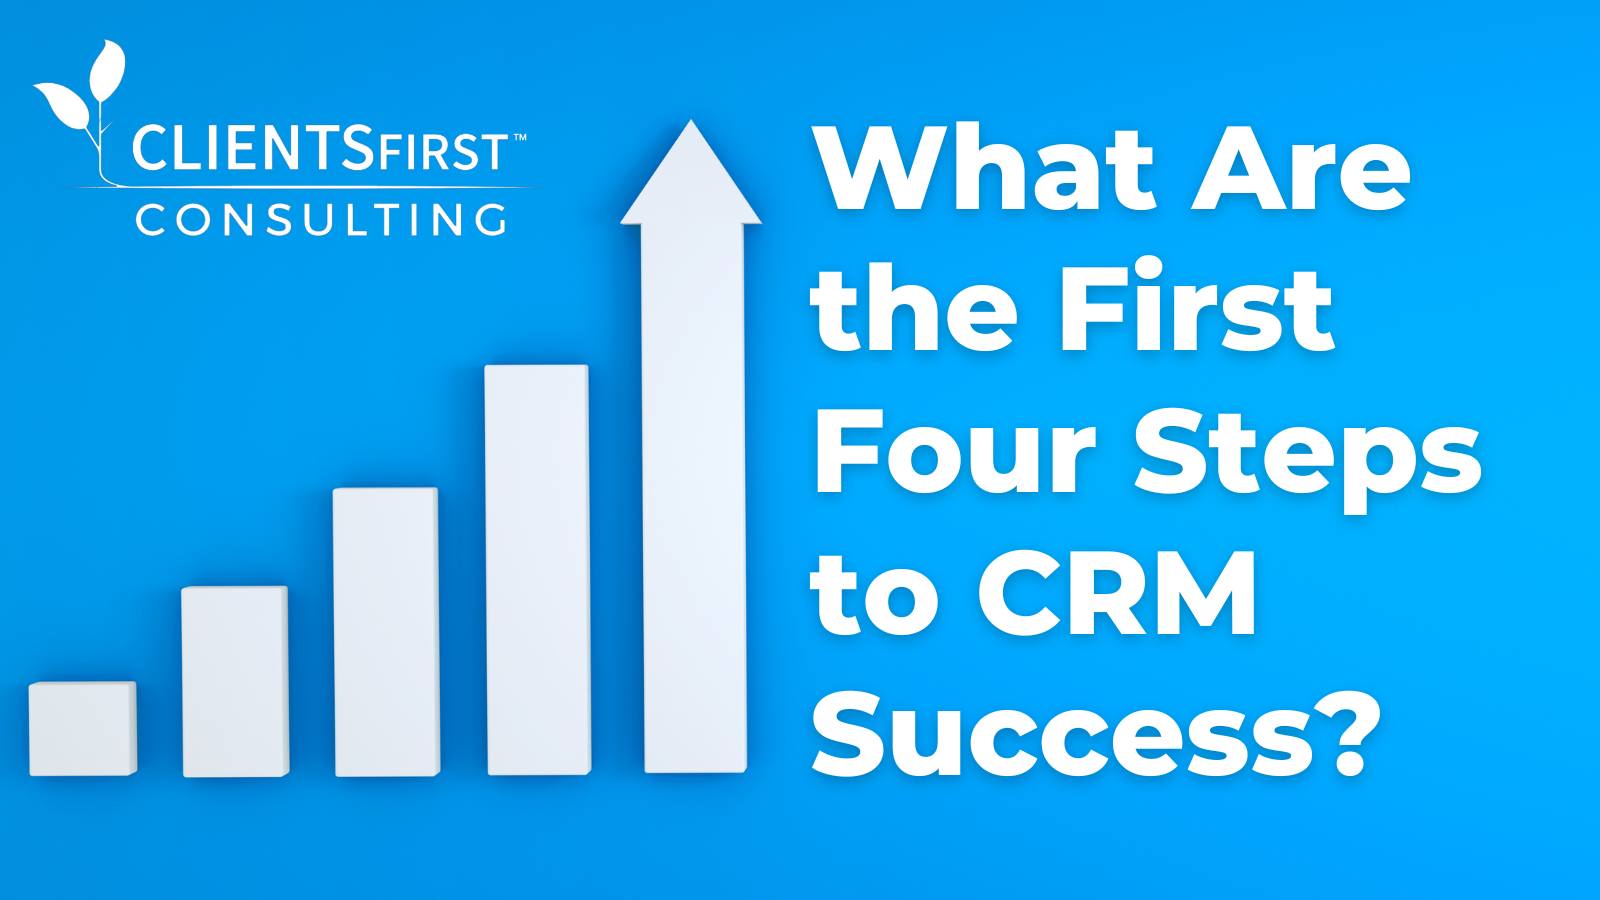 What Are The First Four Steps To CRM Success?